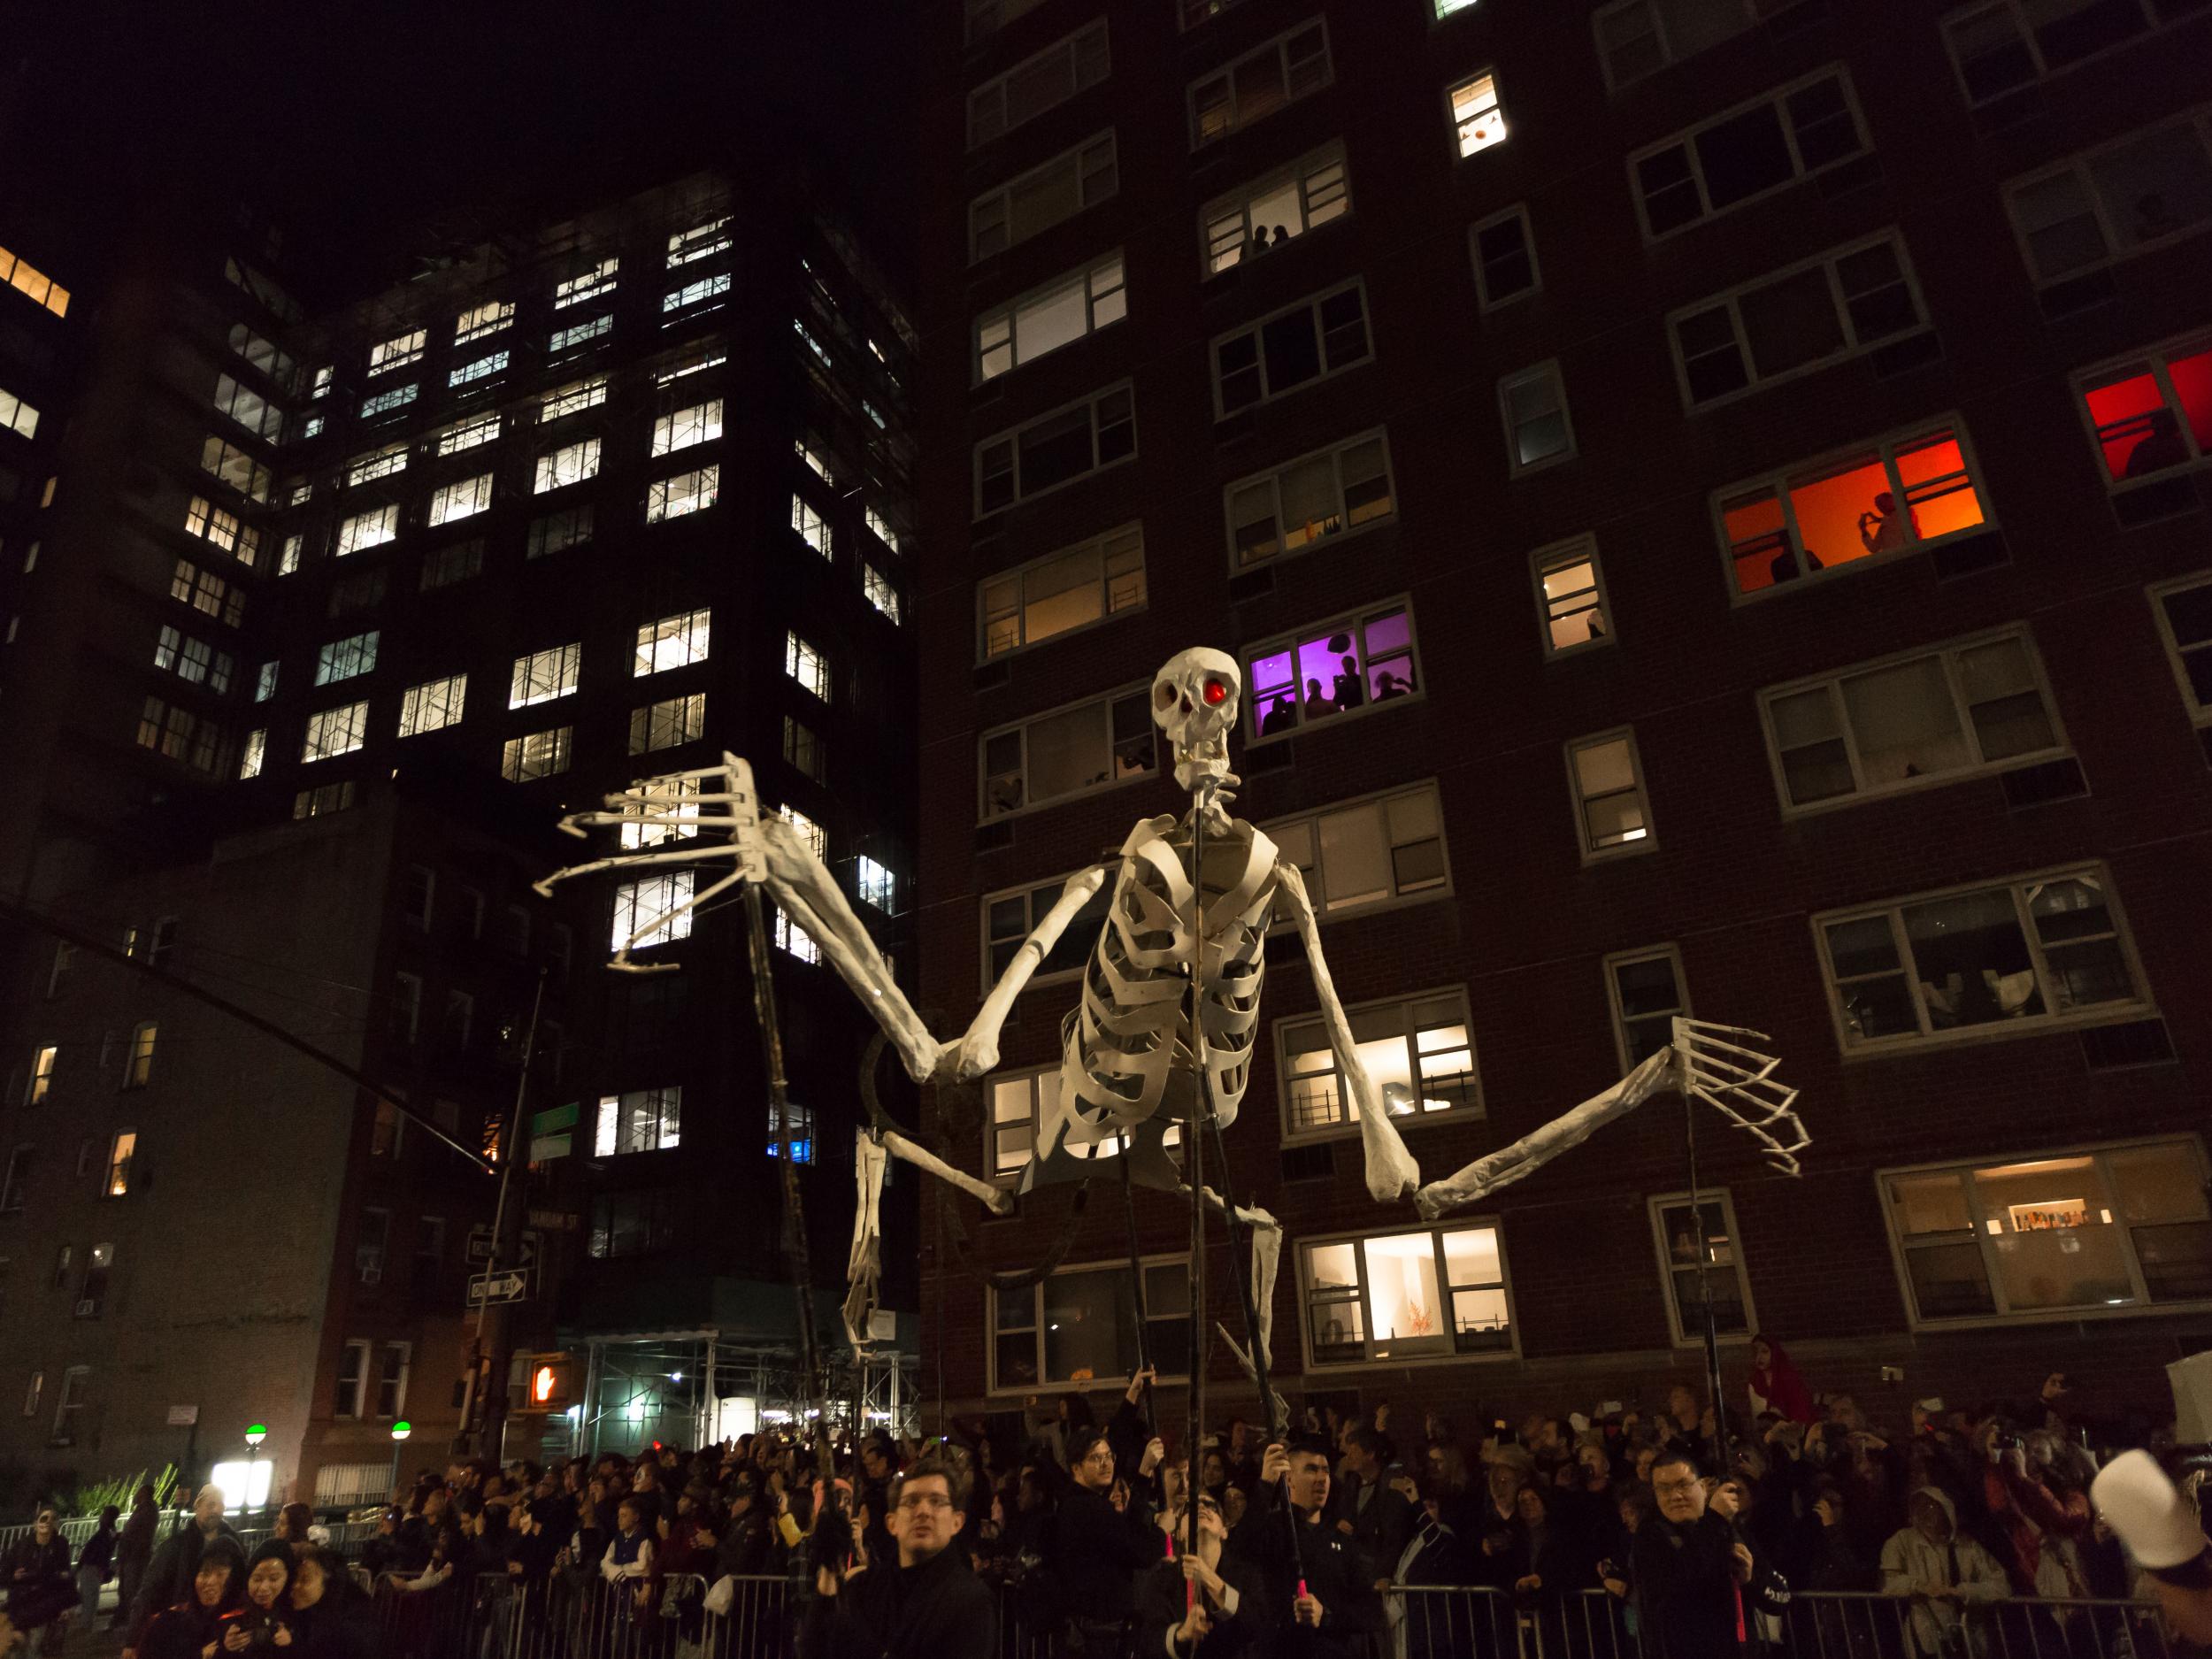 The Manhattan Halloween parade is one of many that occur throughout the year